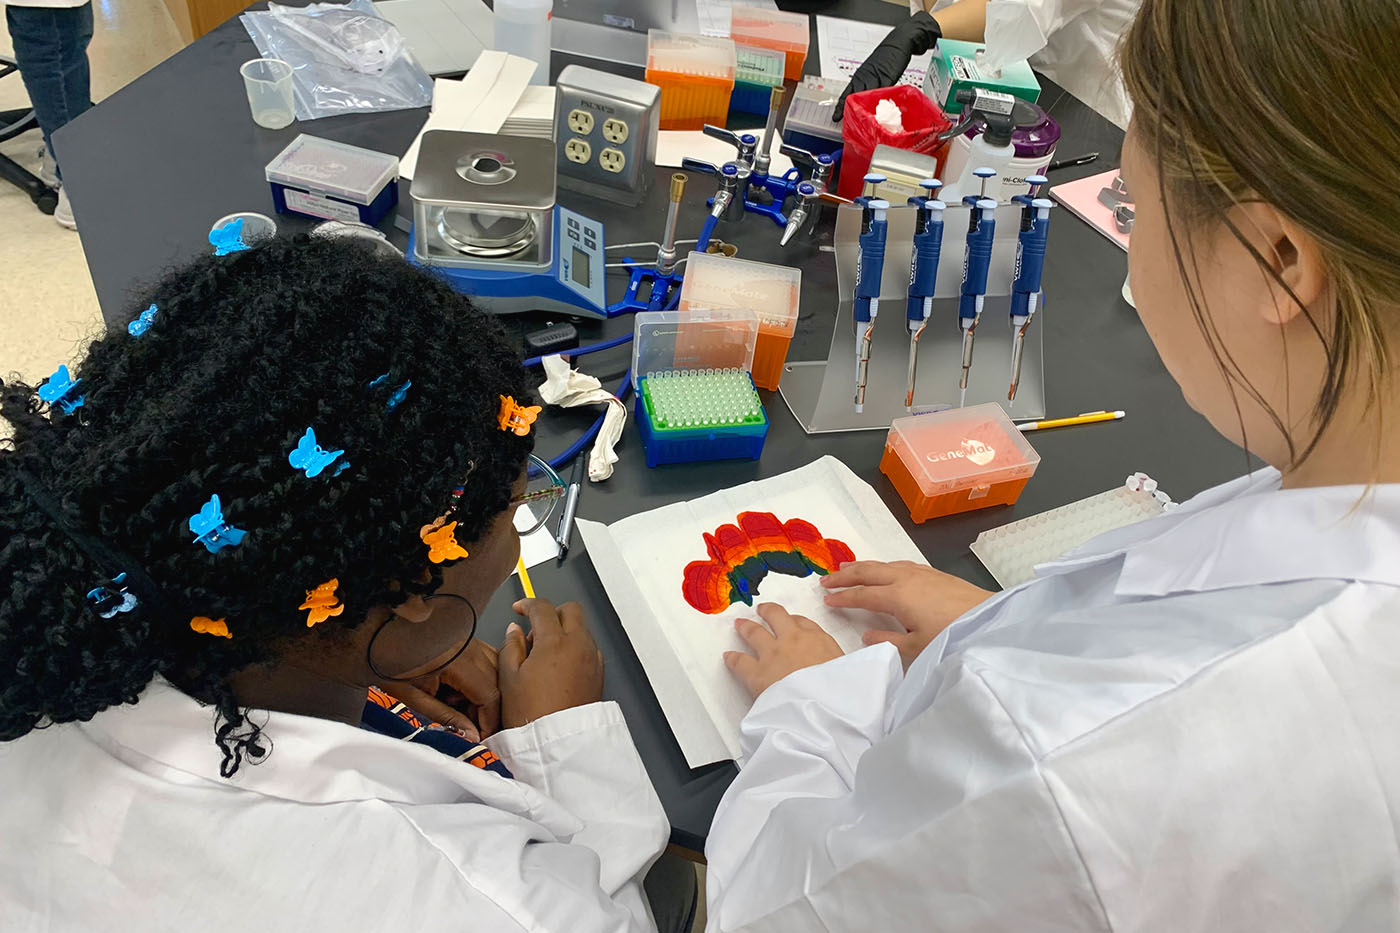 Students pipette the rainbow